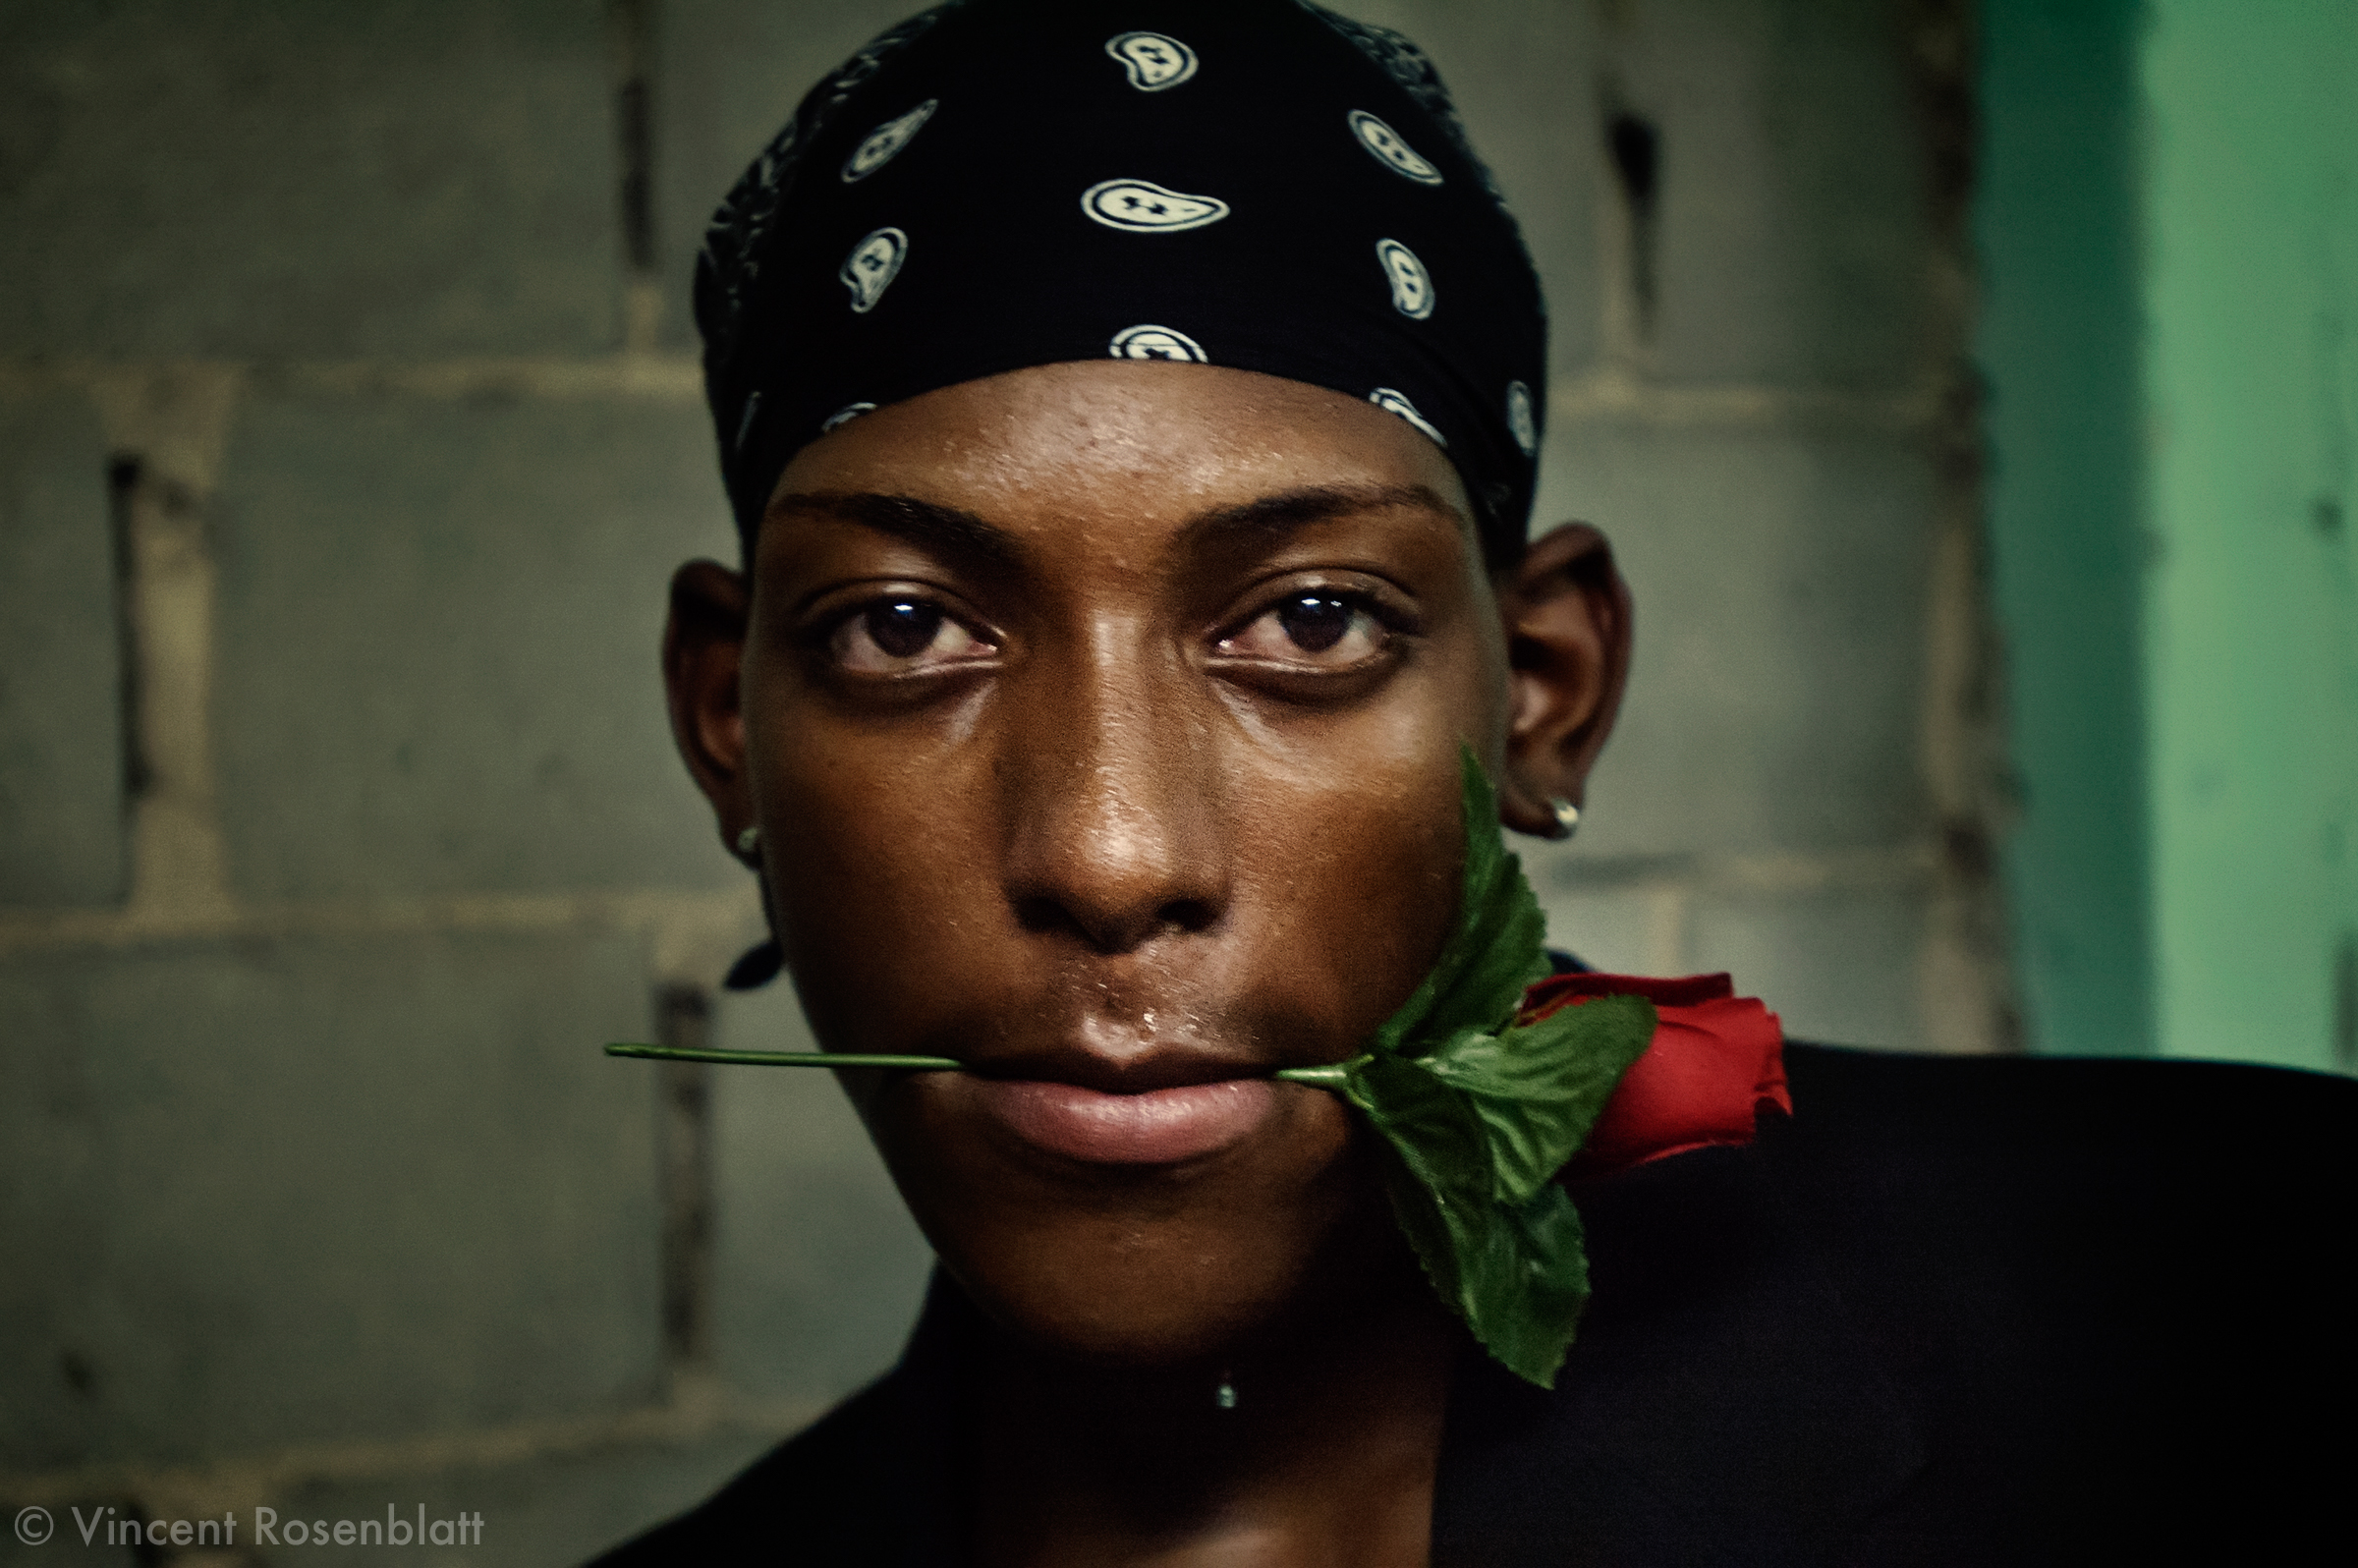  Funk ball in Belford Roxo, near Rio de Janeiro. This funk dancer is using a rose, symbol of the boys band "The Don Juans", famous for their romantic raps.. 